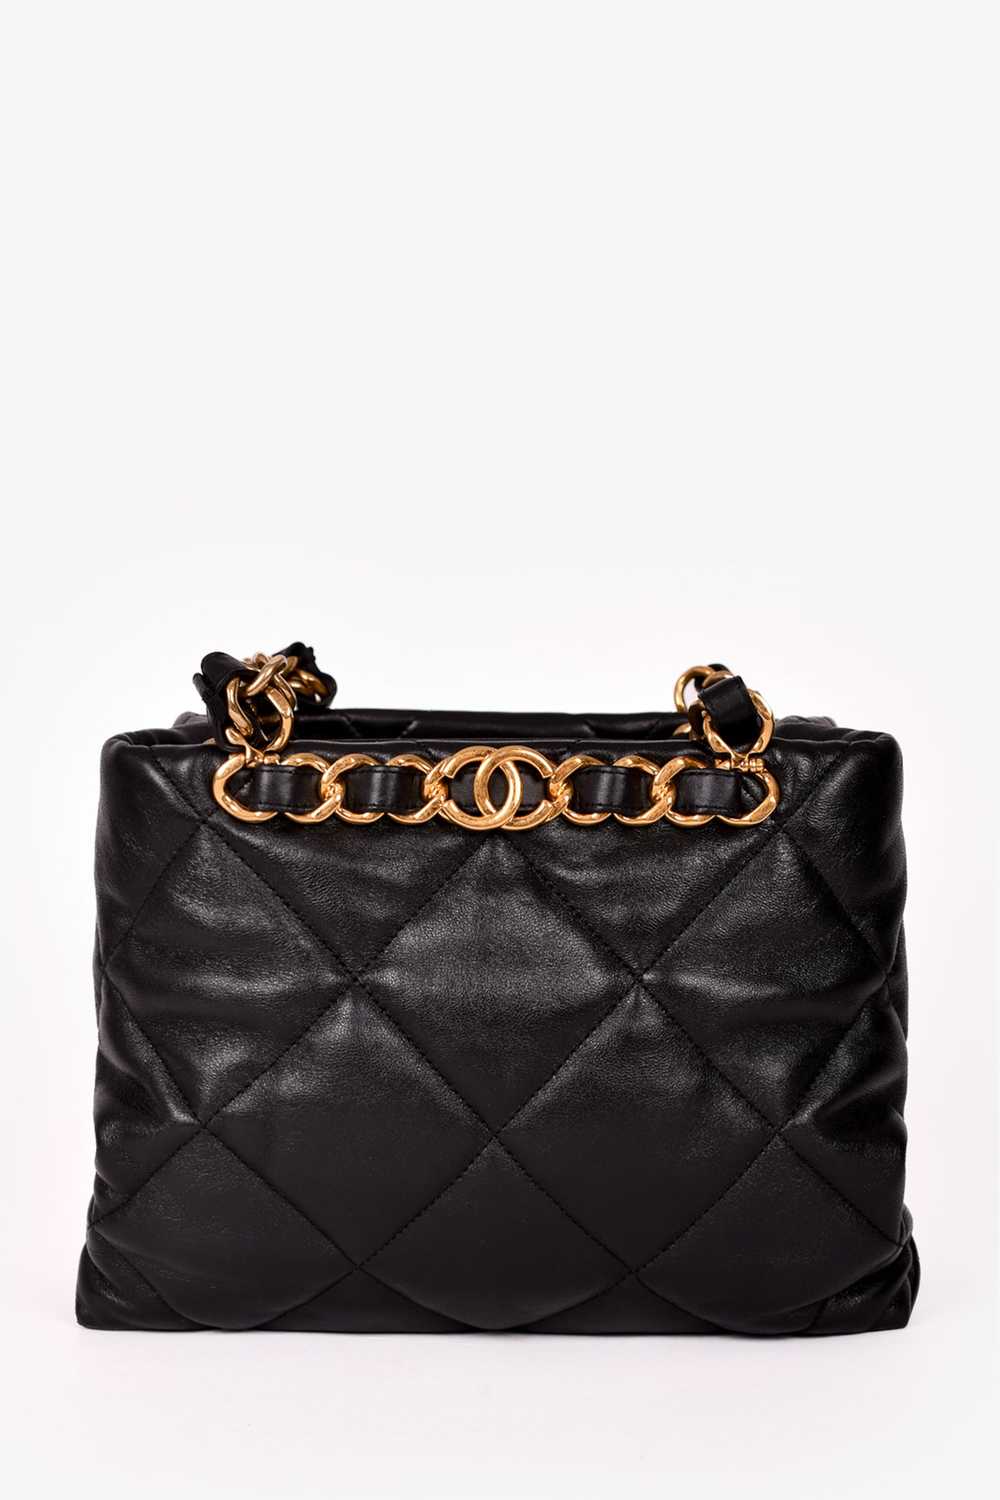 Pre-loved Chanel™ Black Lambskin Quilted Small Sh… - image 10